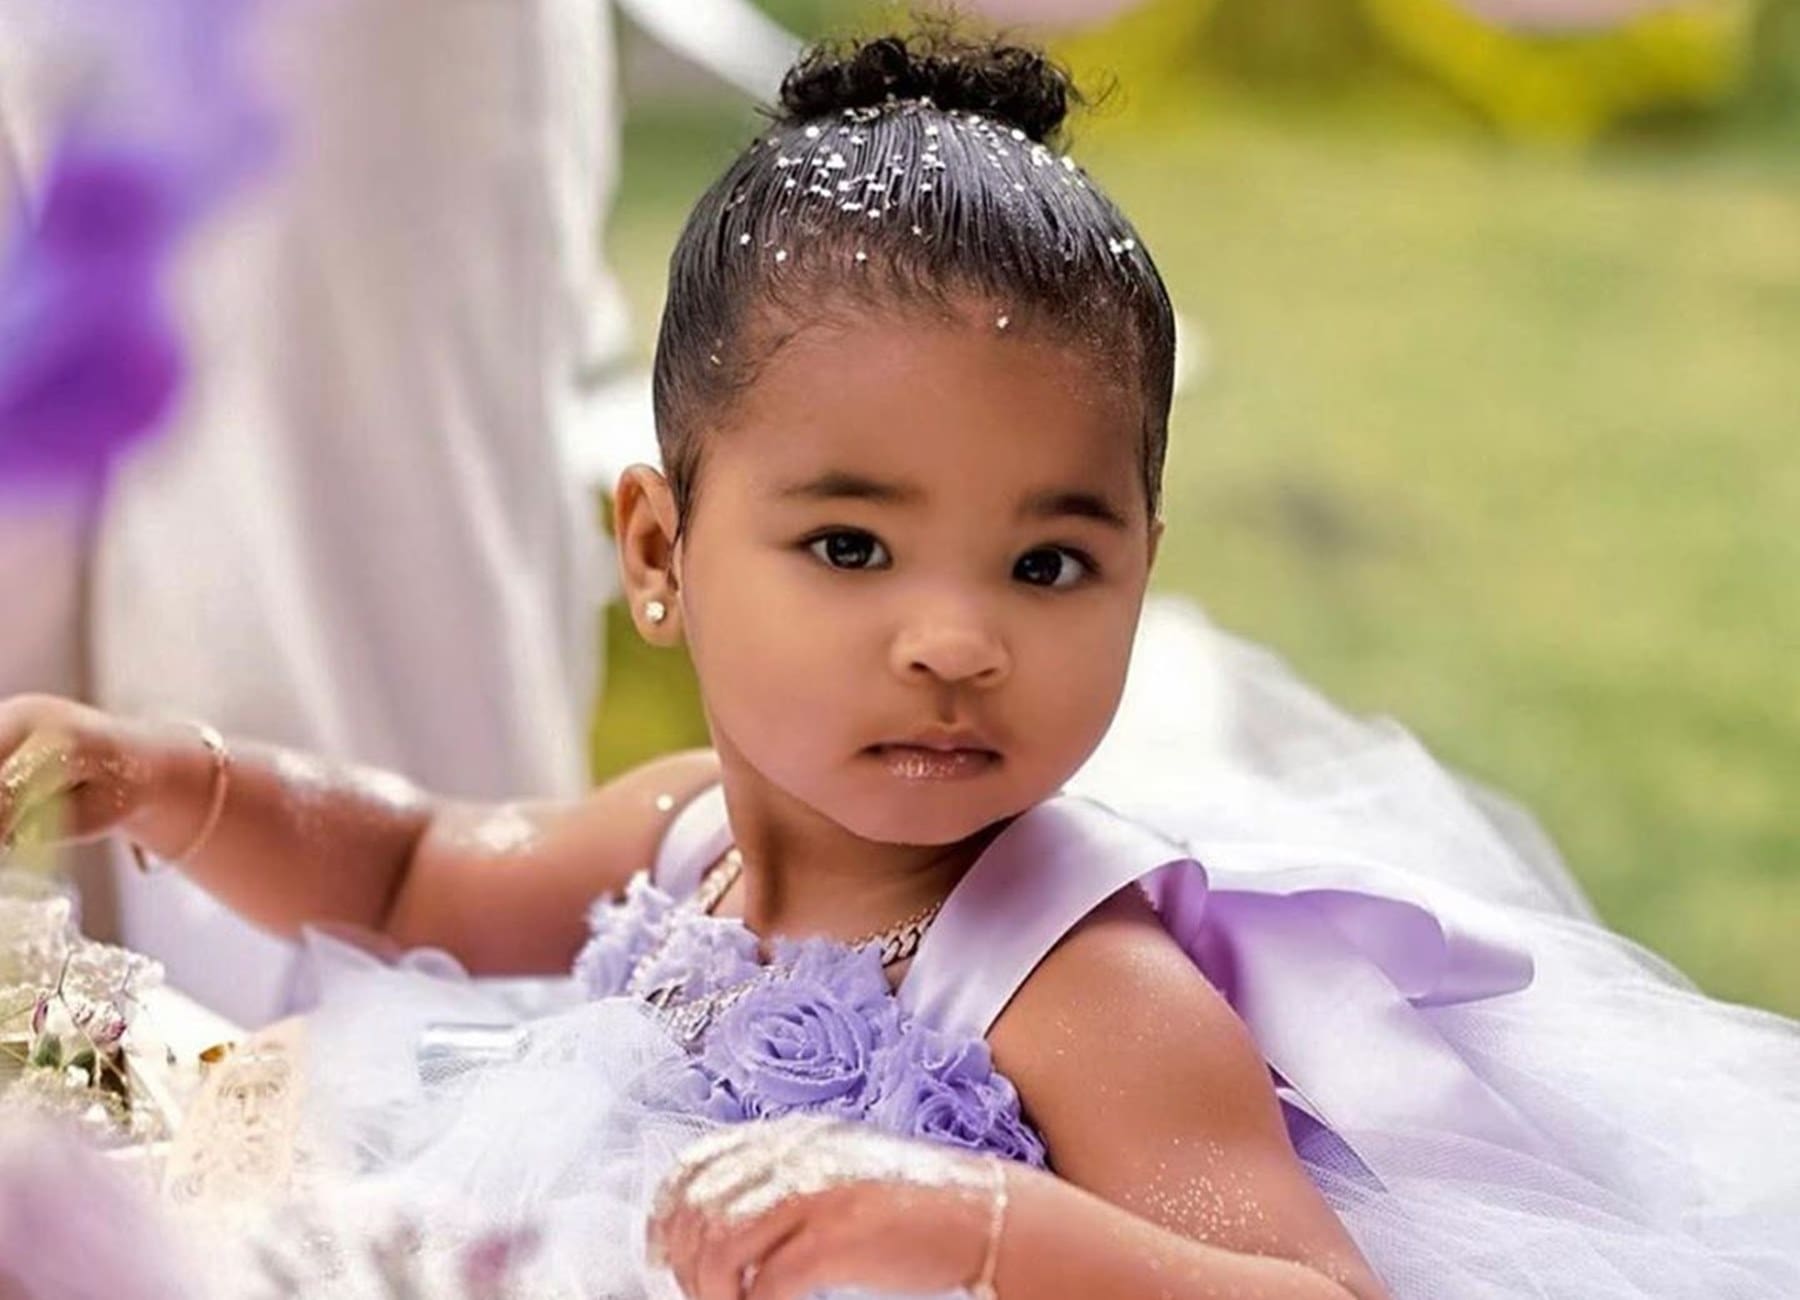 ”khloe-kardashian-and-tristan-thompsons-daughter-looks-beyond-stunning-in-new-photos”